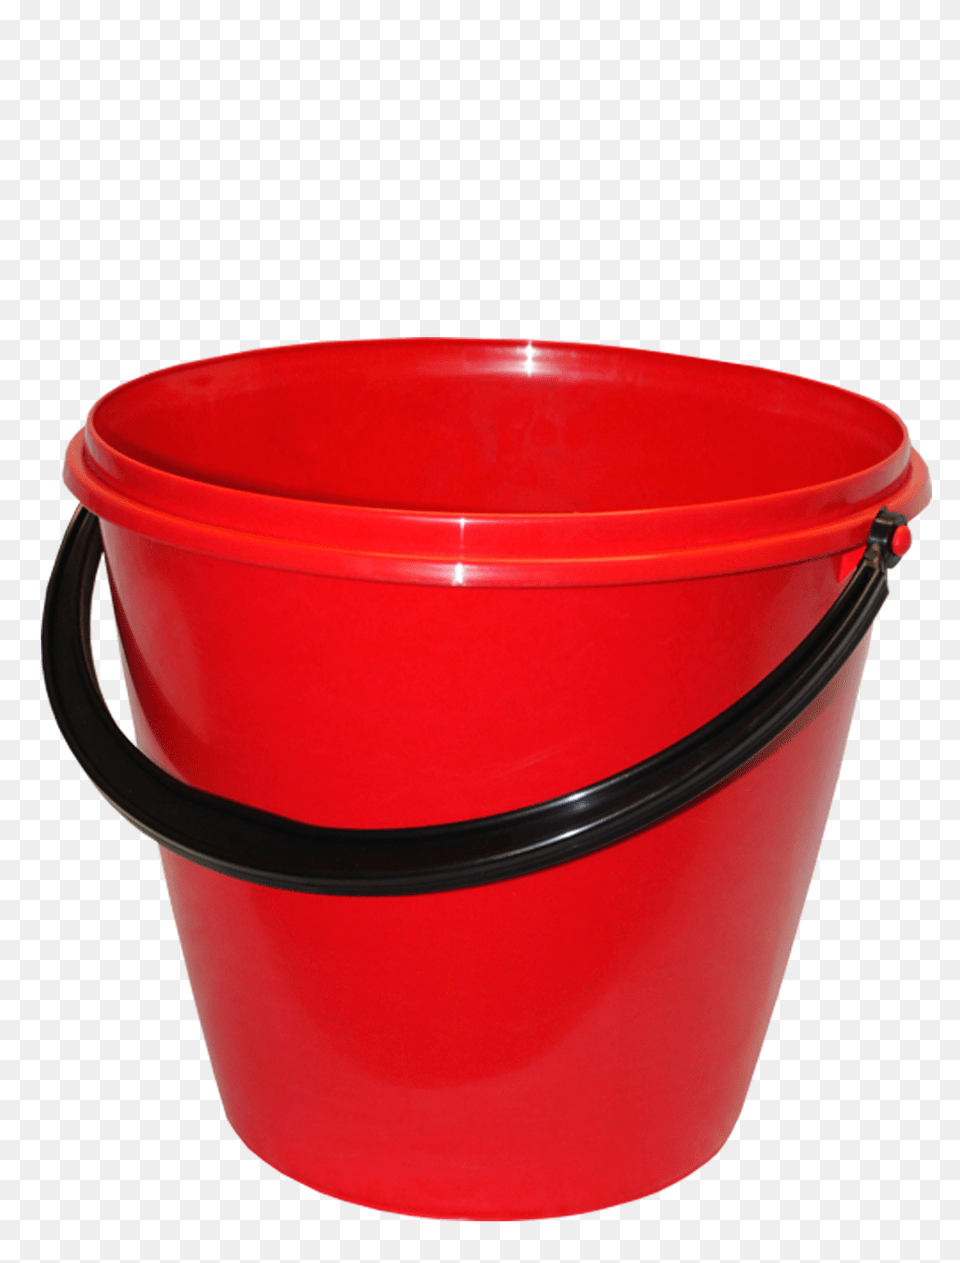 Bucket Images Download Bucket, Mailbox Png Image